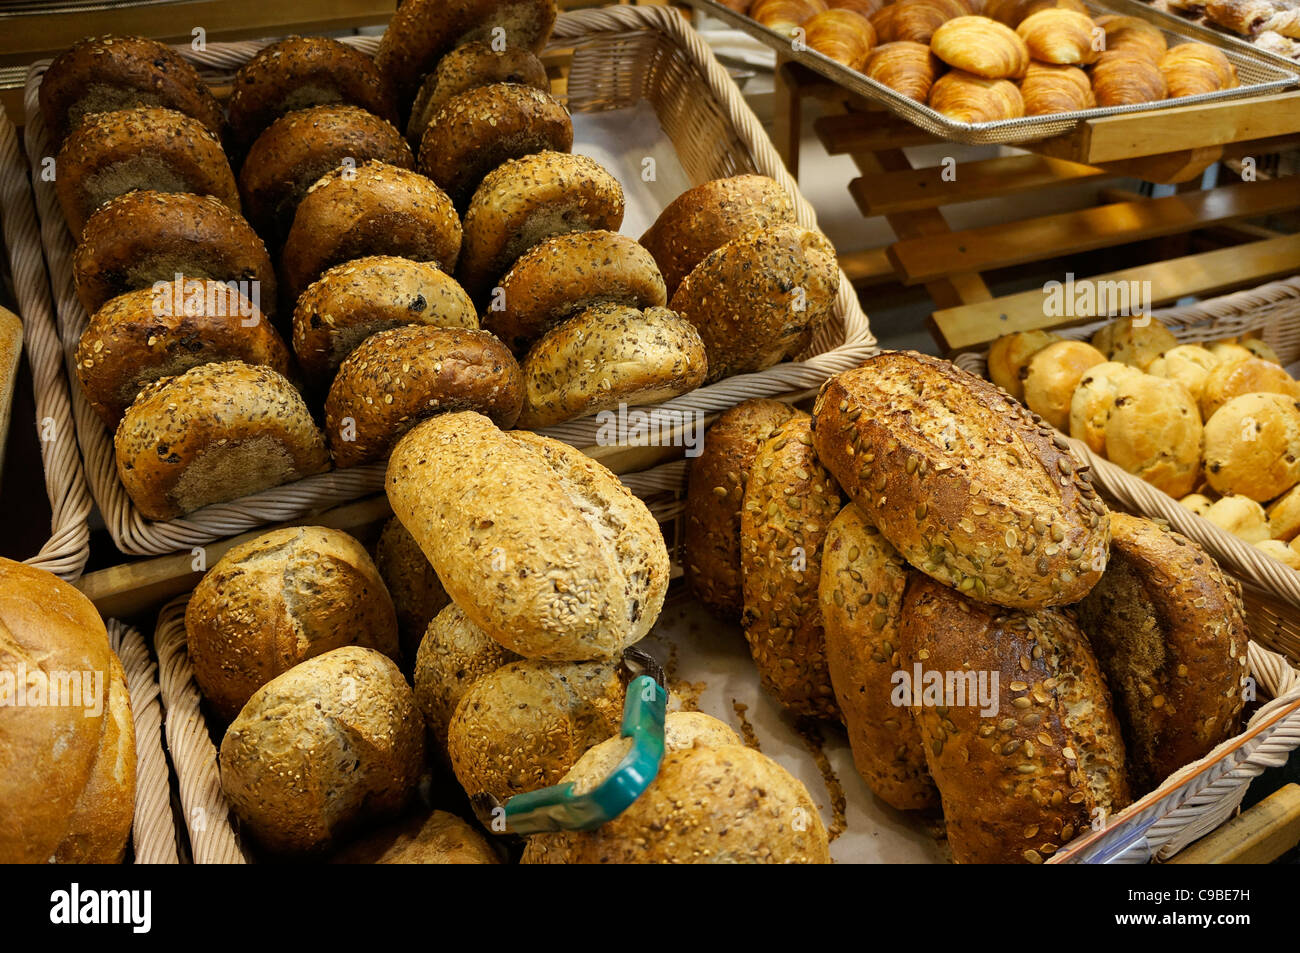 Loaves of Whole Grain Bread Stock Photo